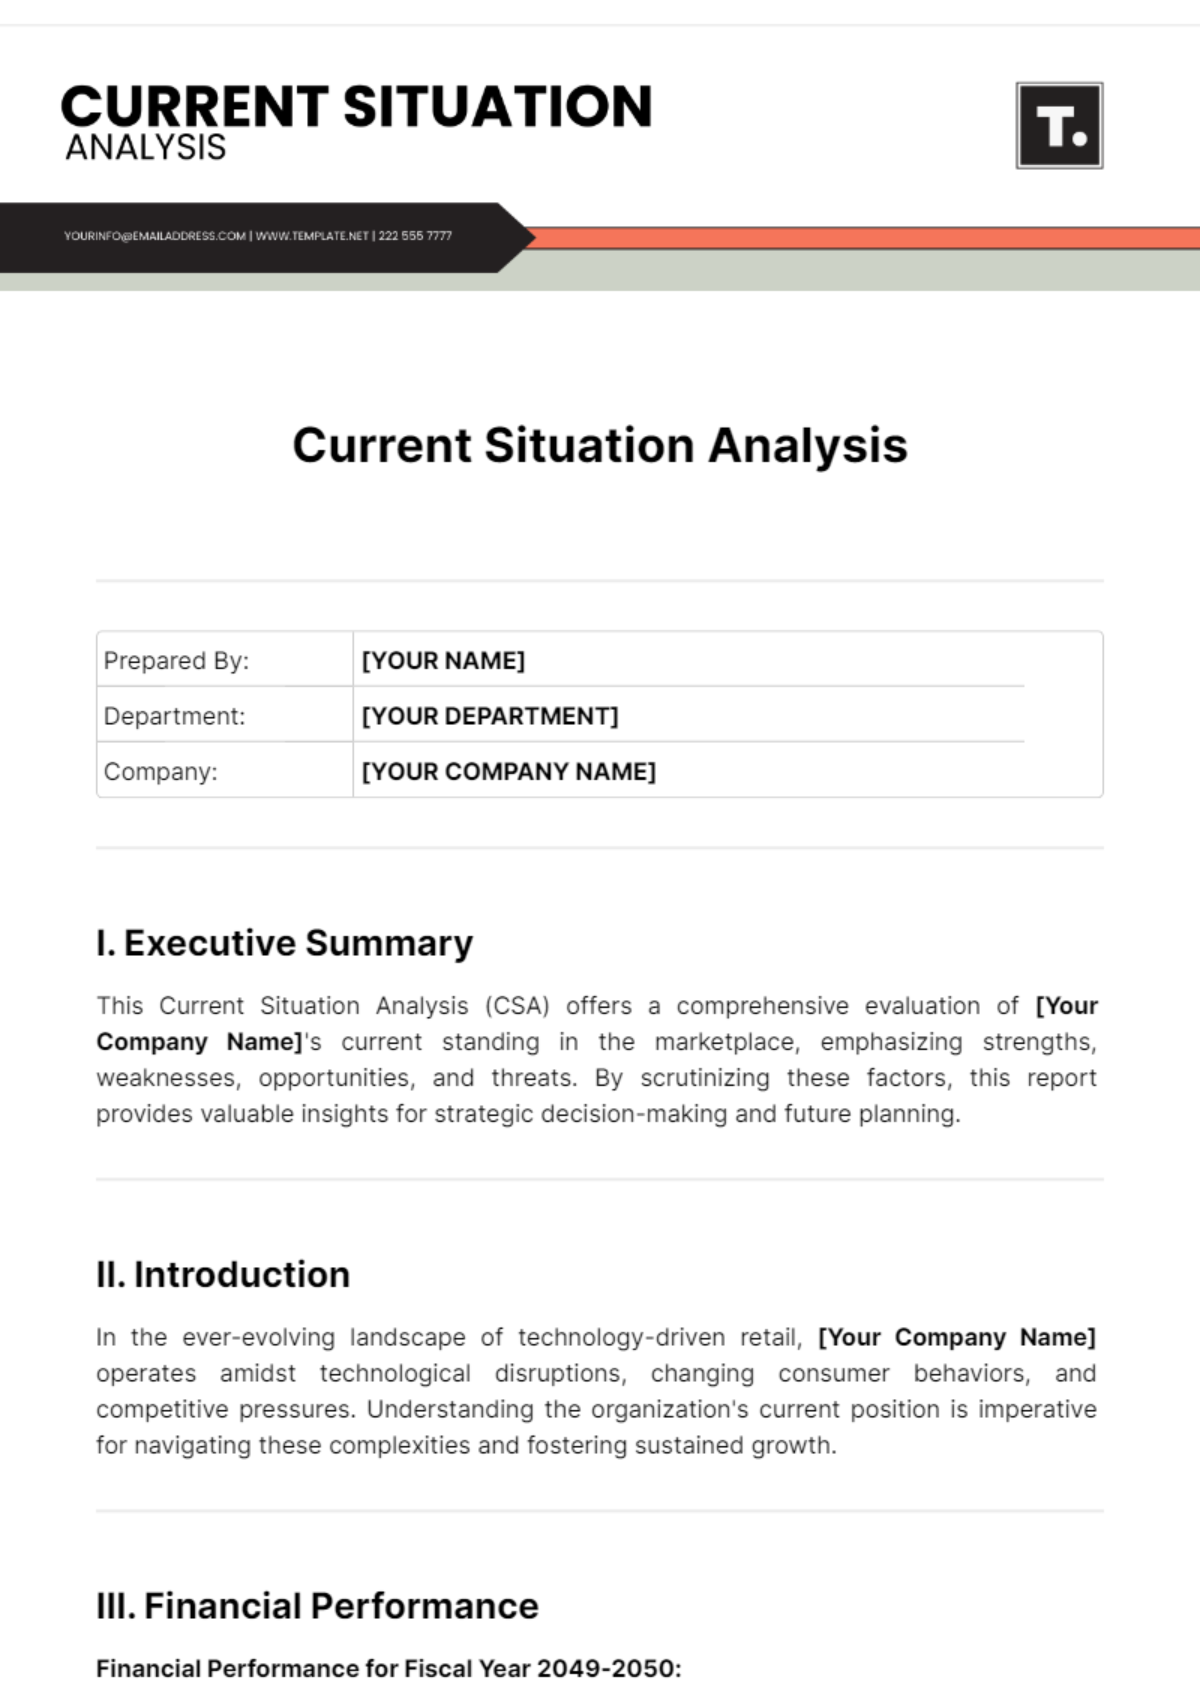 Current Situation Analysis Template